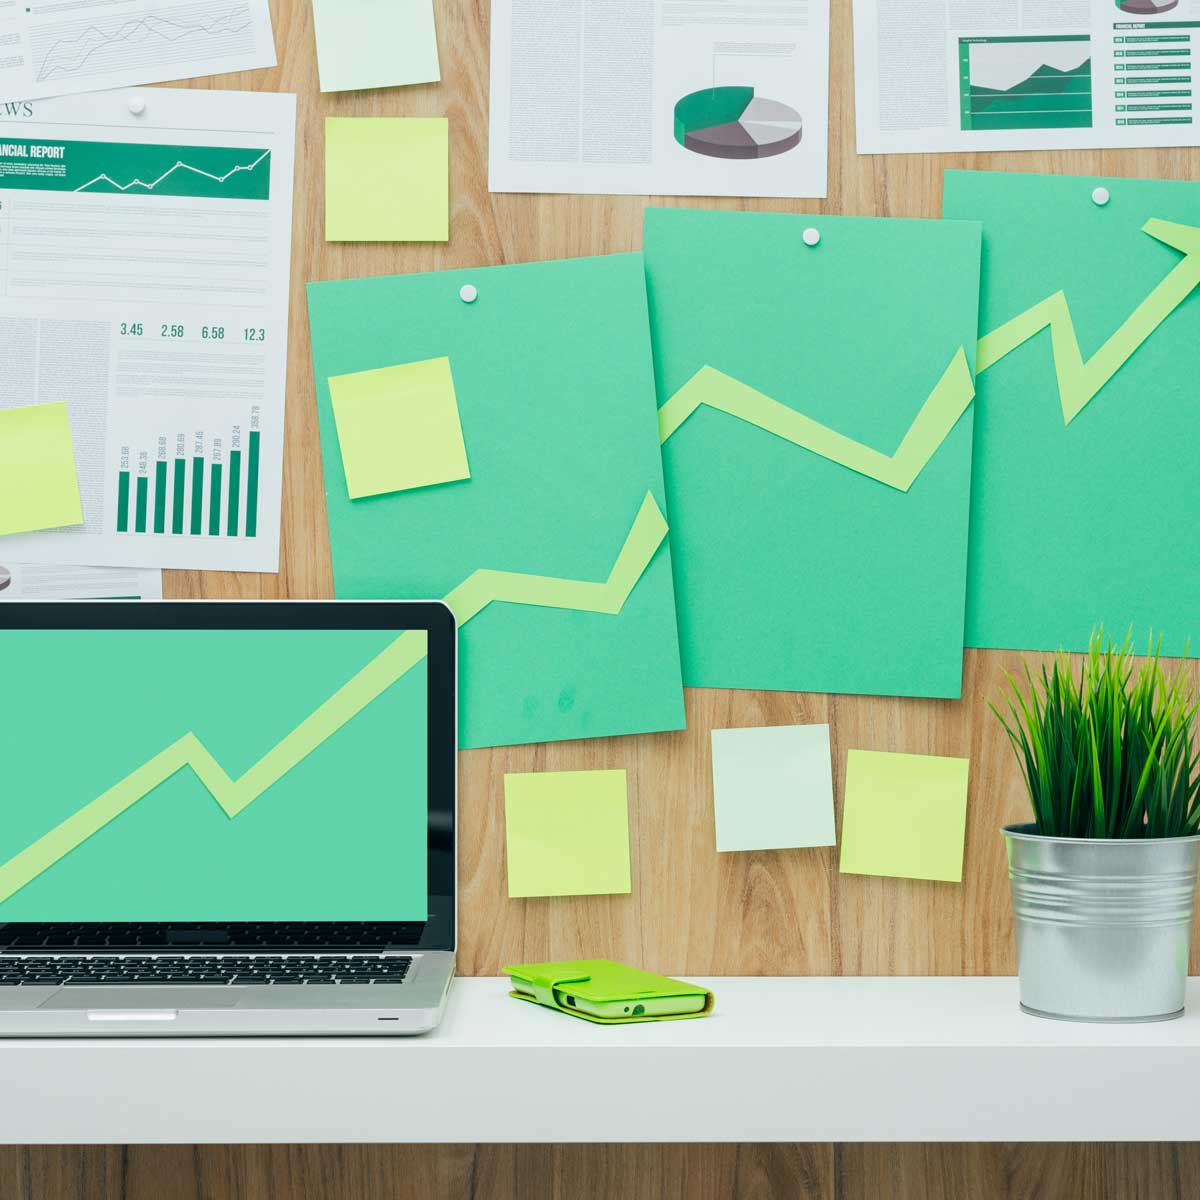 an illustration of financial growth; chart imagery where growth is displayed; green background image